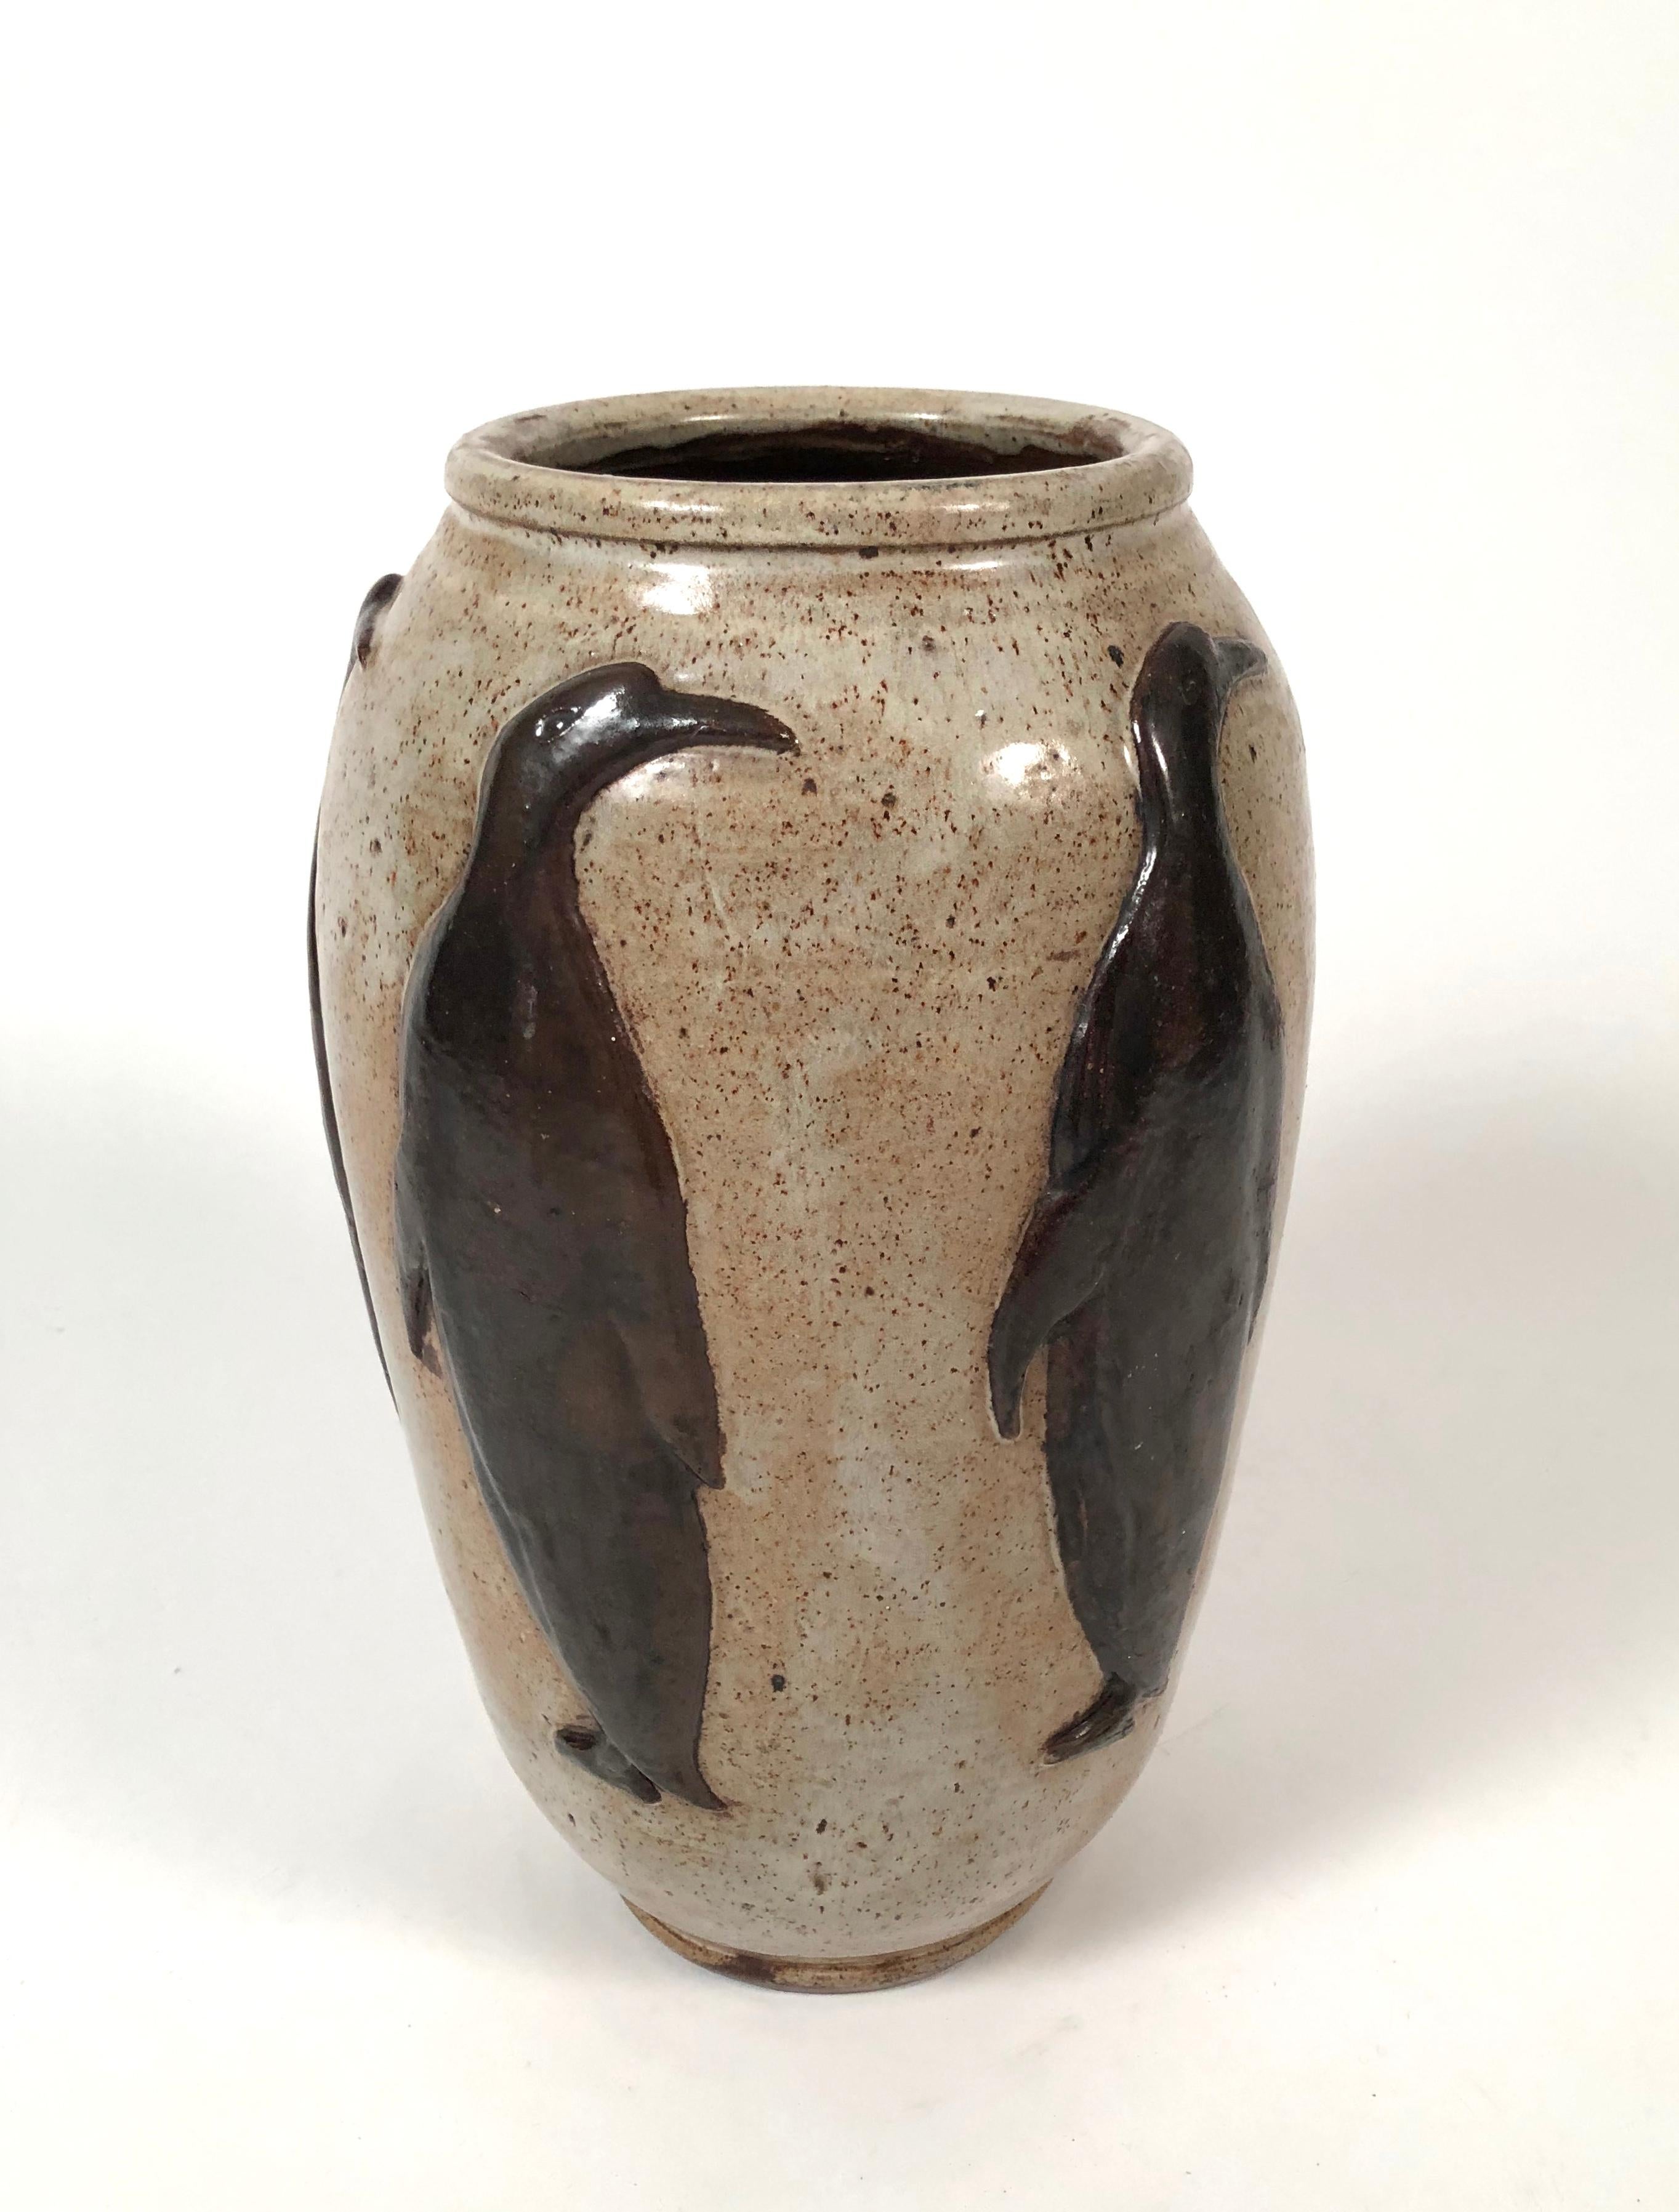 A handmade Art Deco Armogres stoneware art pottery vase, decorated with brown glazed penguins in relief on a speckled tan ground, in the manner of Roger Guerin, Bouffioulx, Belgium, circa 1930. Impressed stamp marks Bouffioulx and incised Armogres.